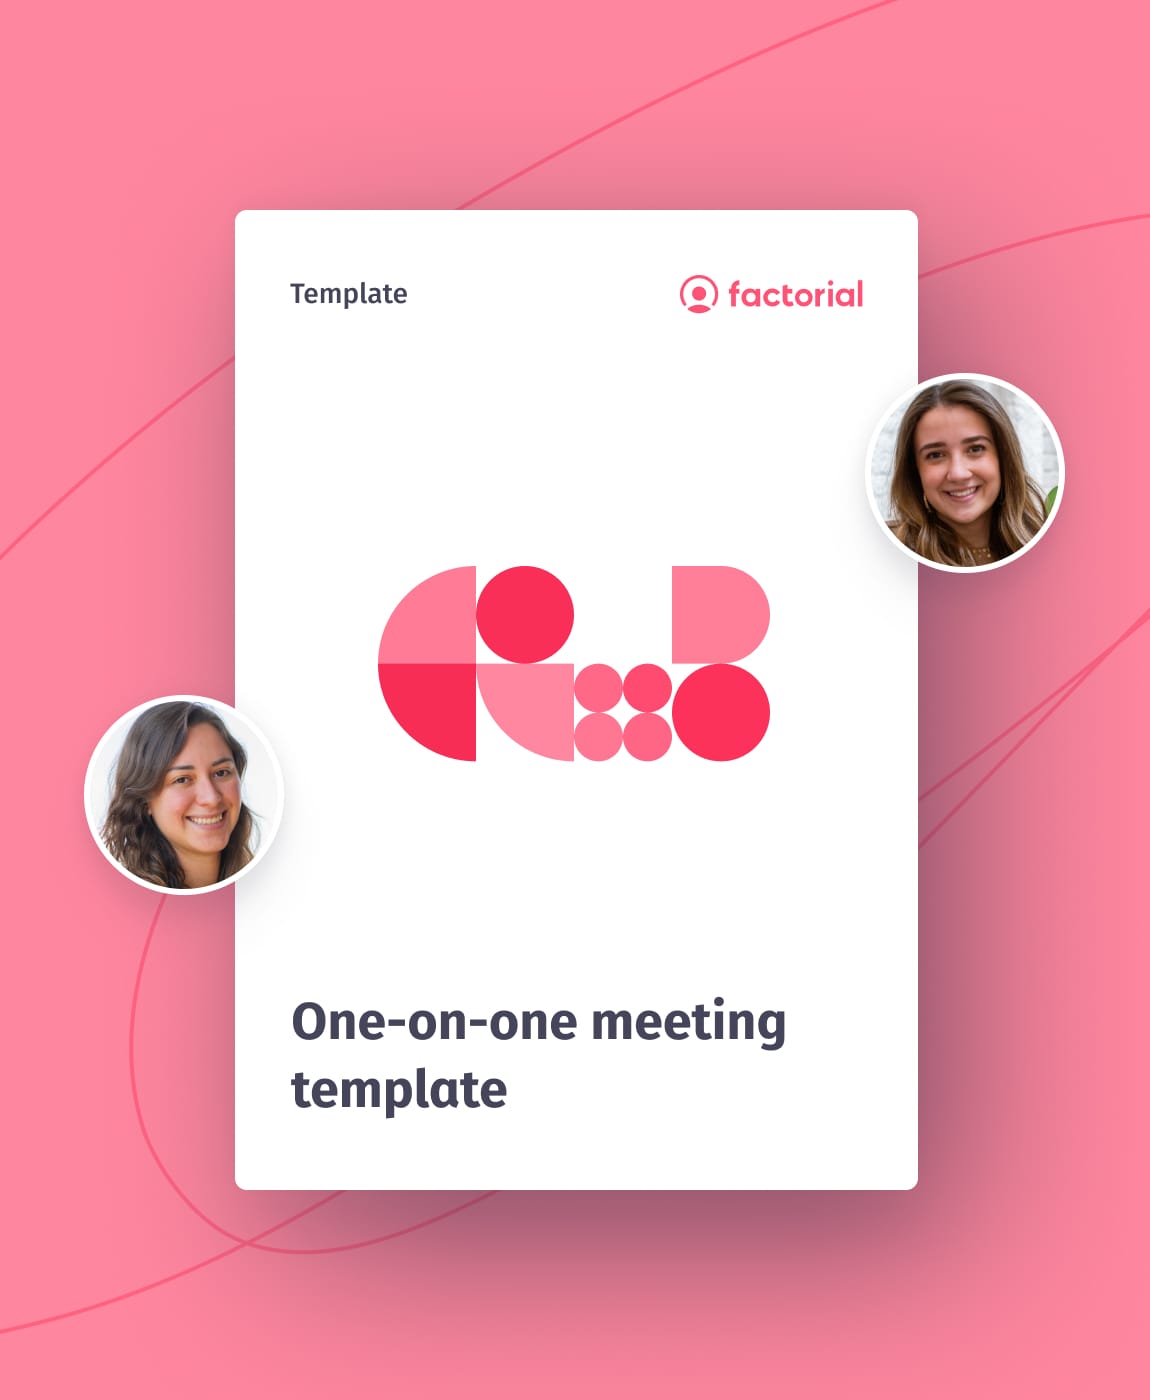 One-on-one meeting template